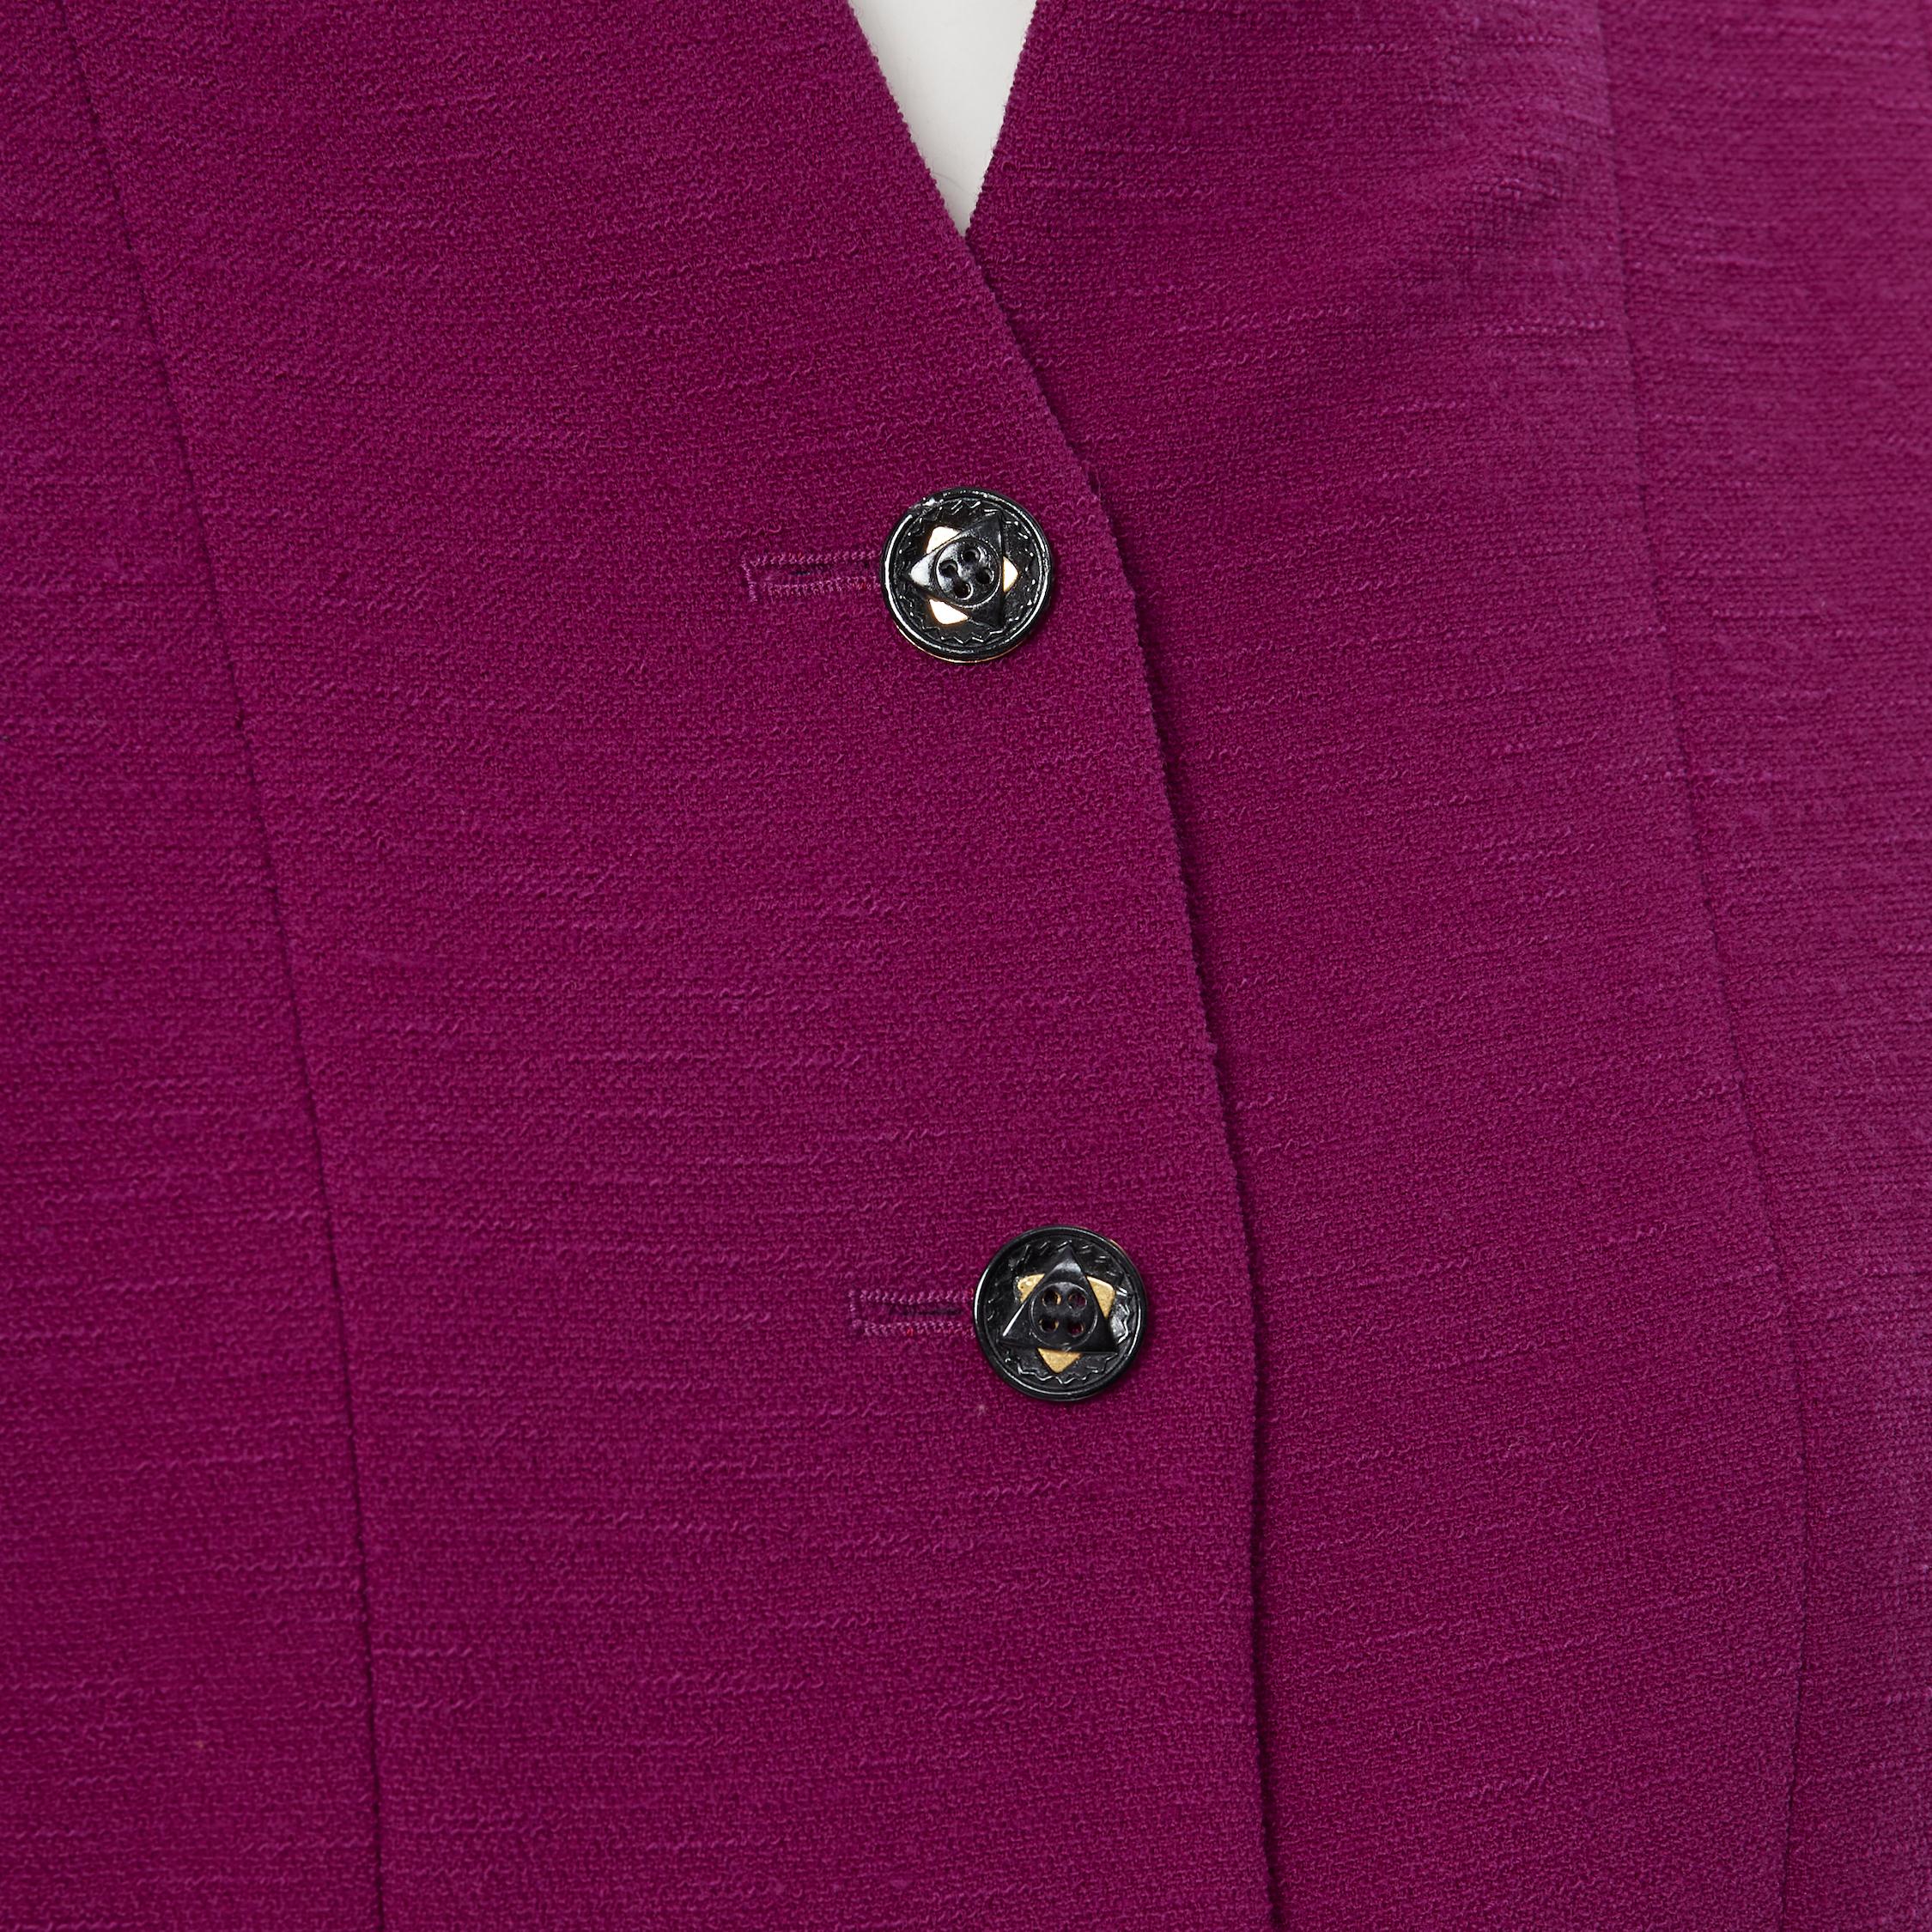 vintage KARL LAGERFELD purple wool graphic button paneled blazer skirt suit FR36 
Reference: GIYG/A00061 
Brand: Karl Lagerfeld 
Designer: Karl Lagerfeld 
Material: Wool 
Color: Purple 
Pattern: Solid 
Closure: Button 
Extra Detail: This blazer